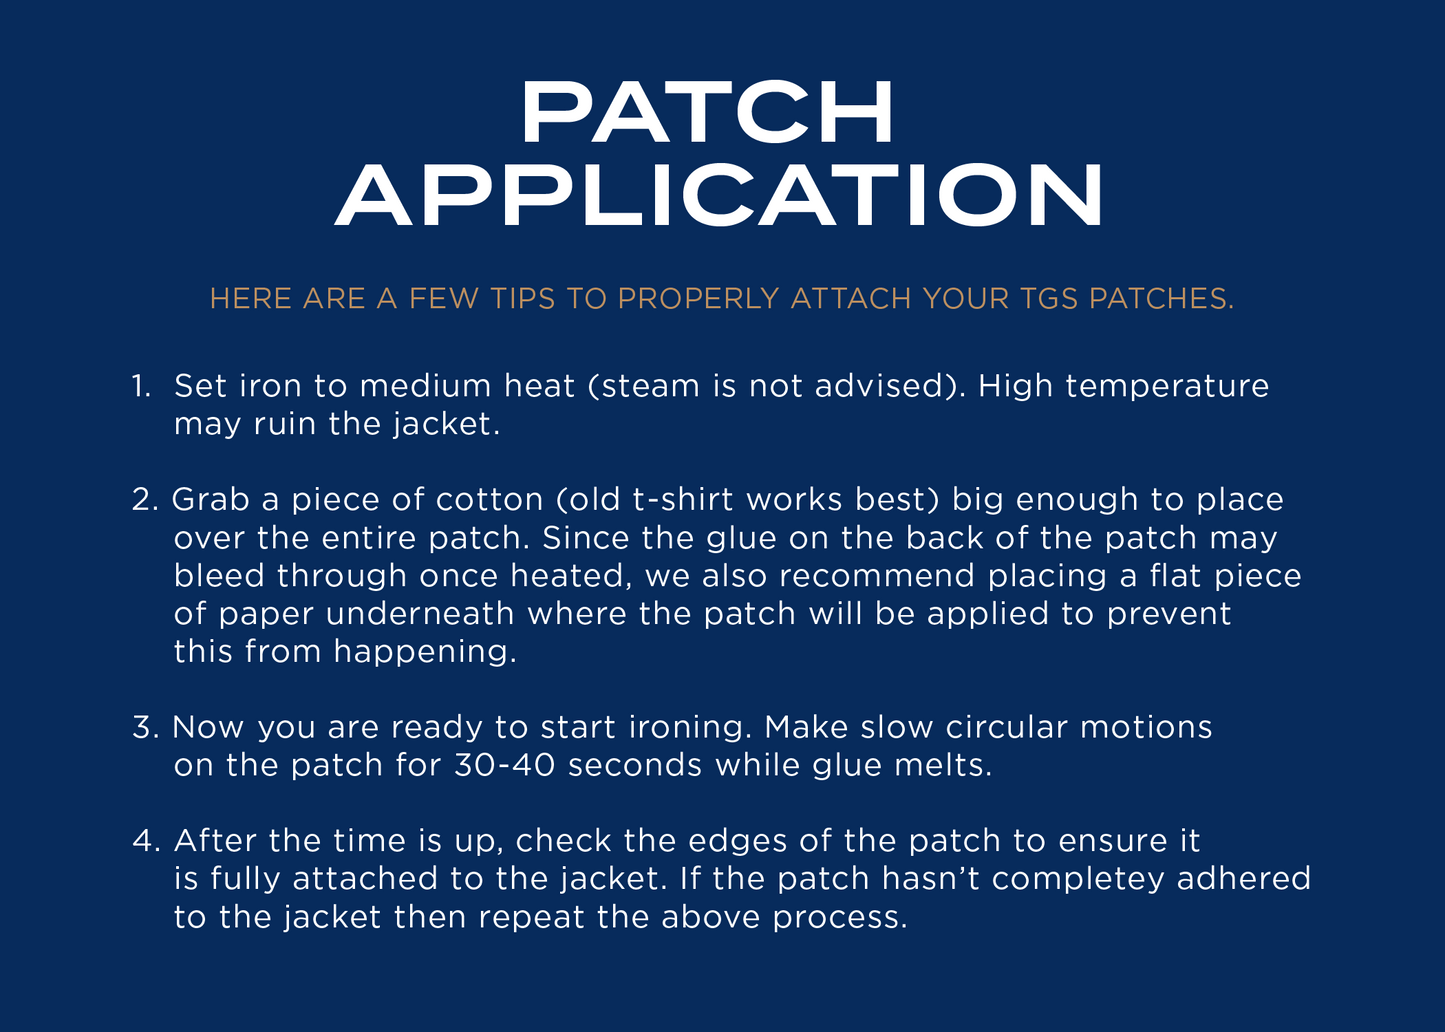 Why We Gather Iron-On Patch